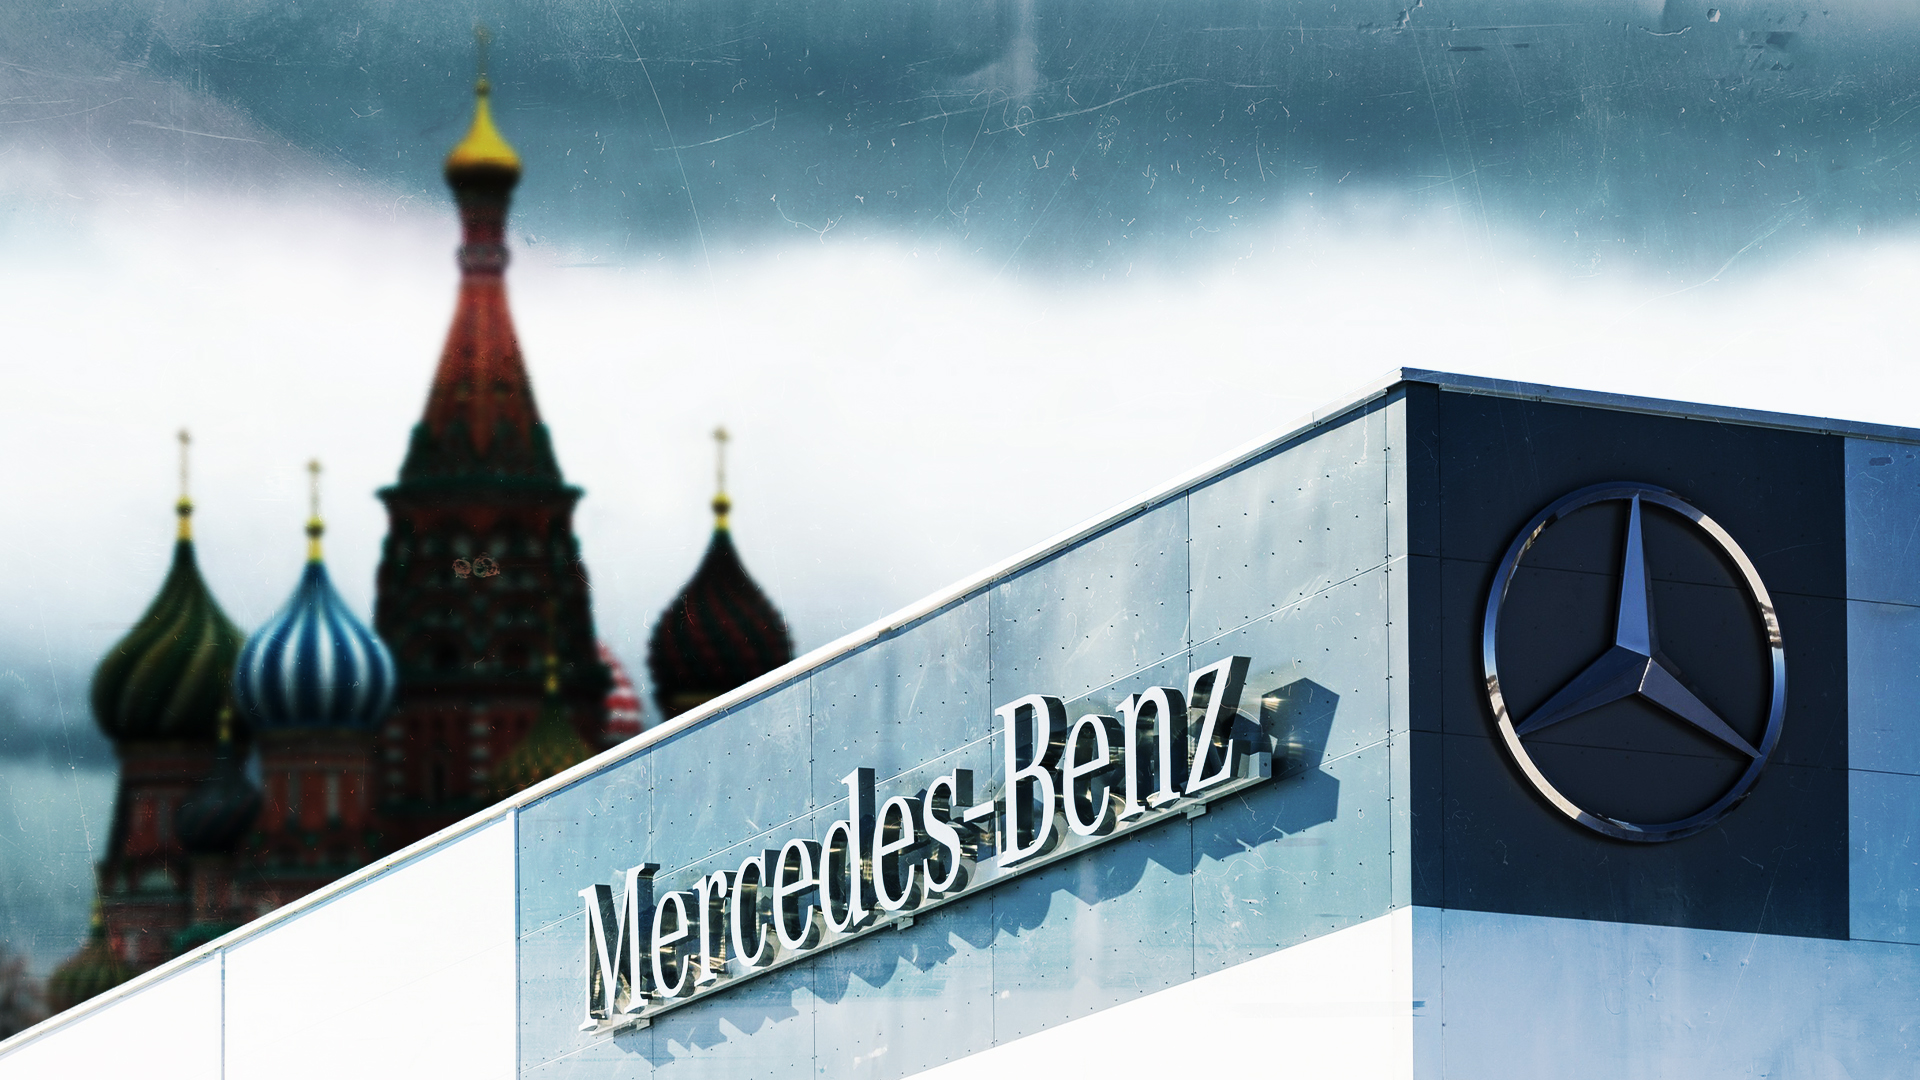 Mercedes-Benz sells off shares to local investor after leaving Russia